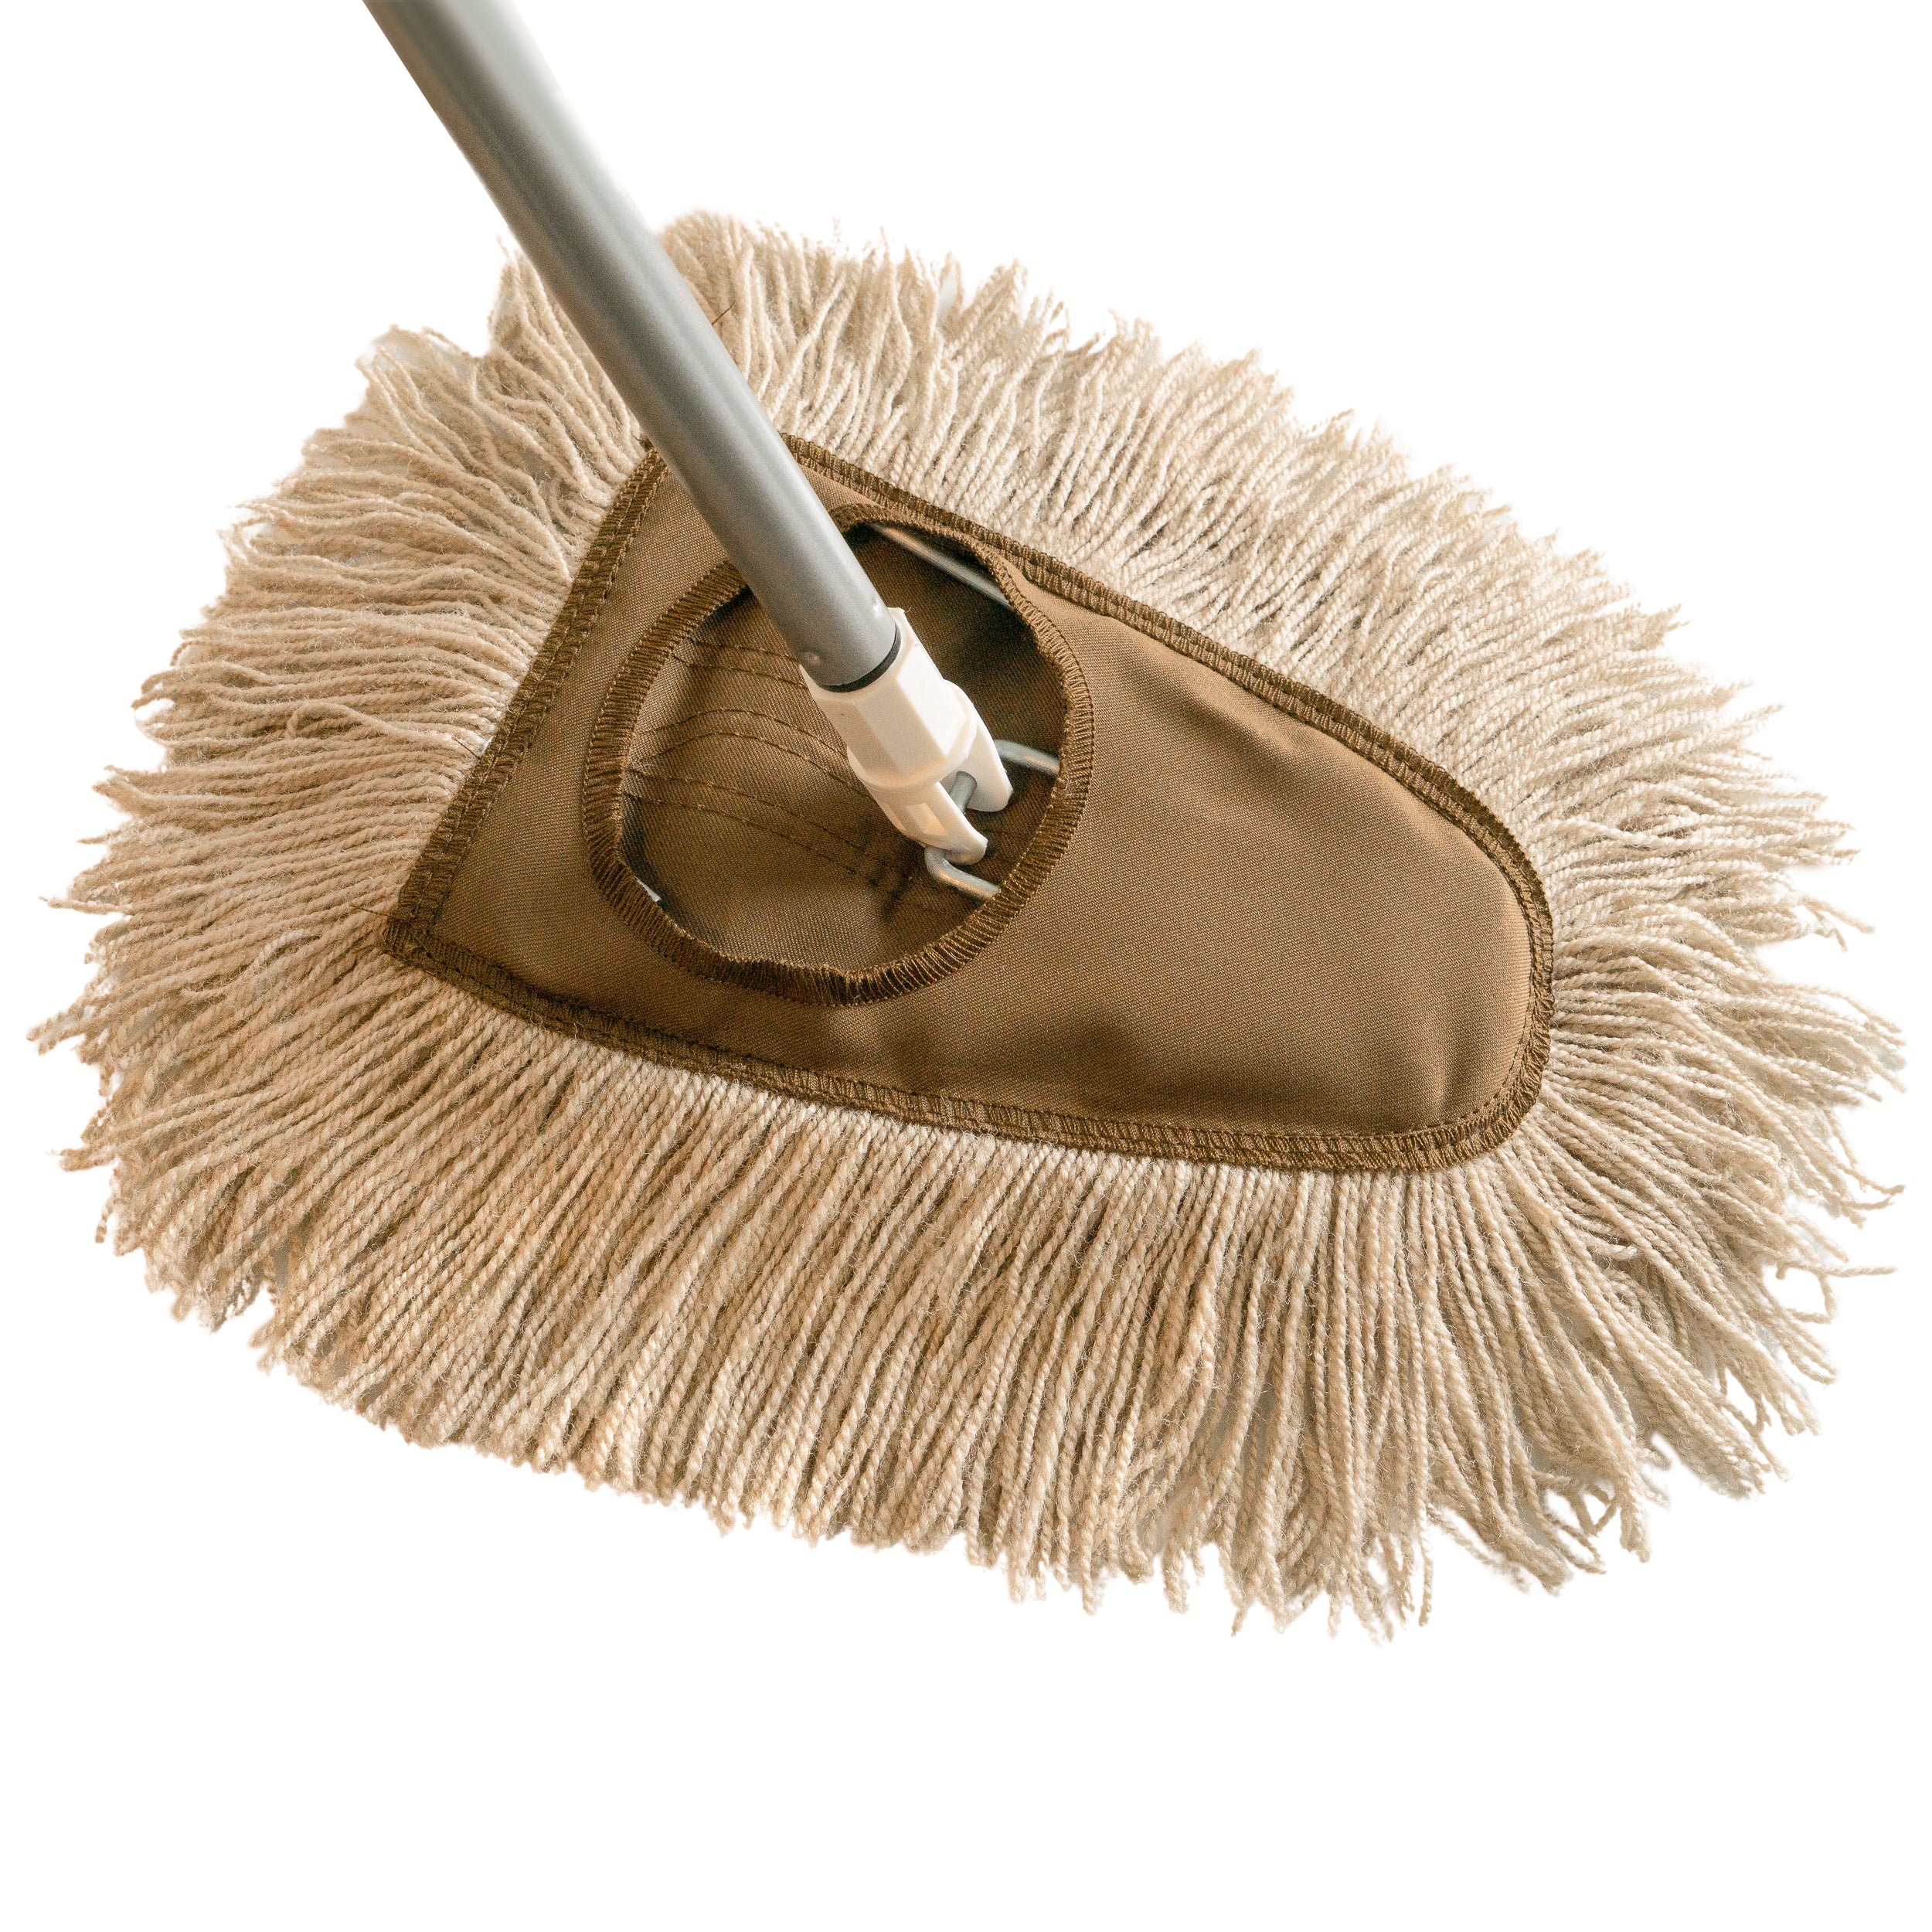 Find it difficult to mop because you've got to use a lot of effort? W